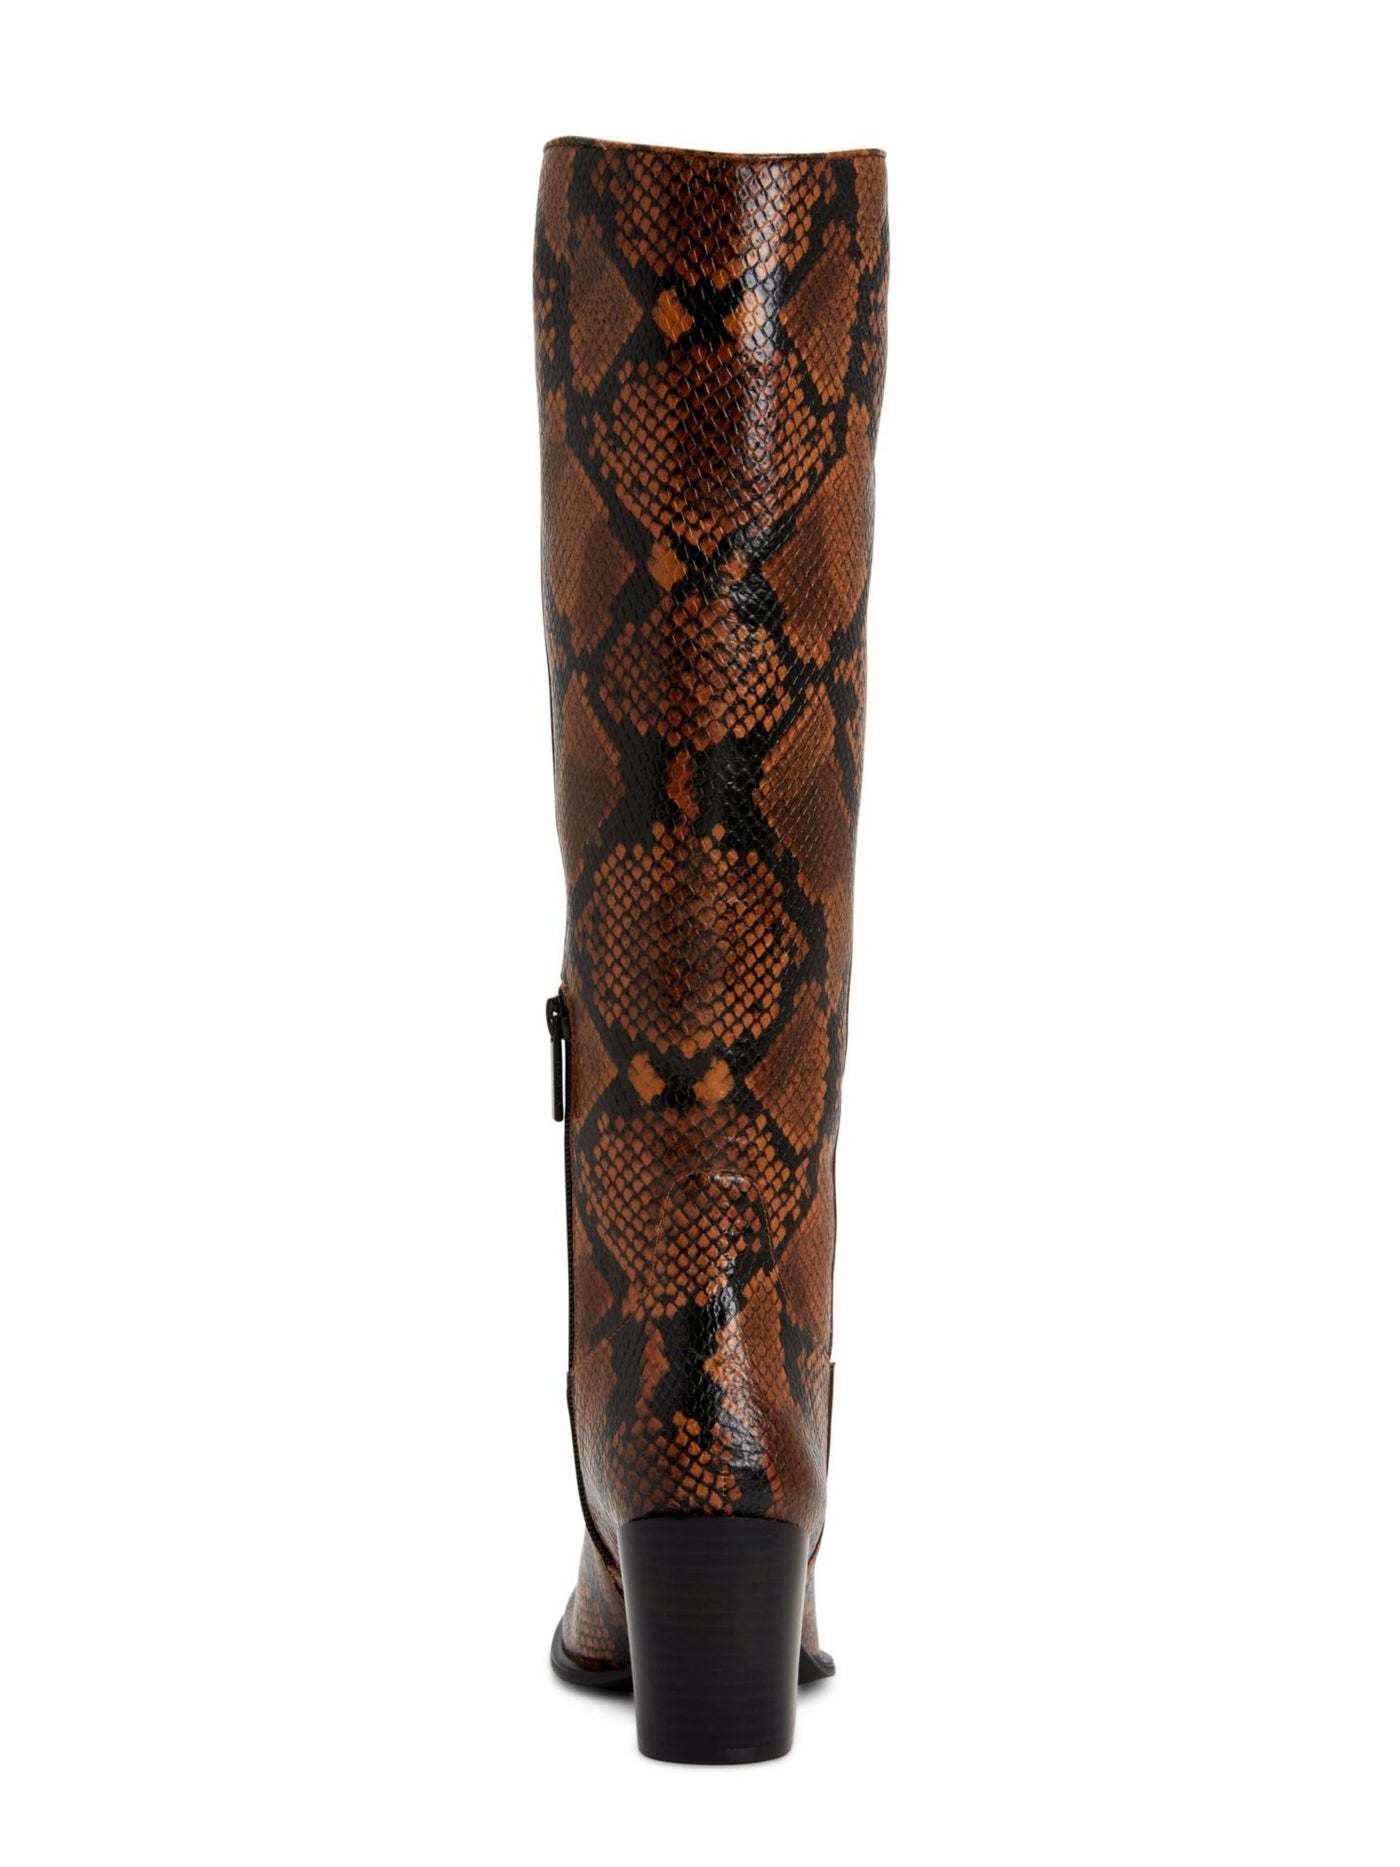 CALVIN KLEIN Womens Brown Animal Print Almond Toe Stacked Heel Zip-Up Leather Heeled Boots 6